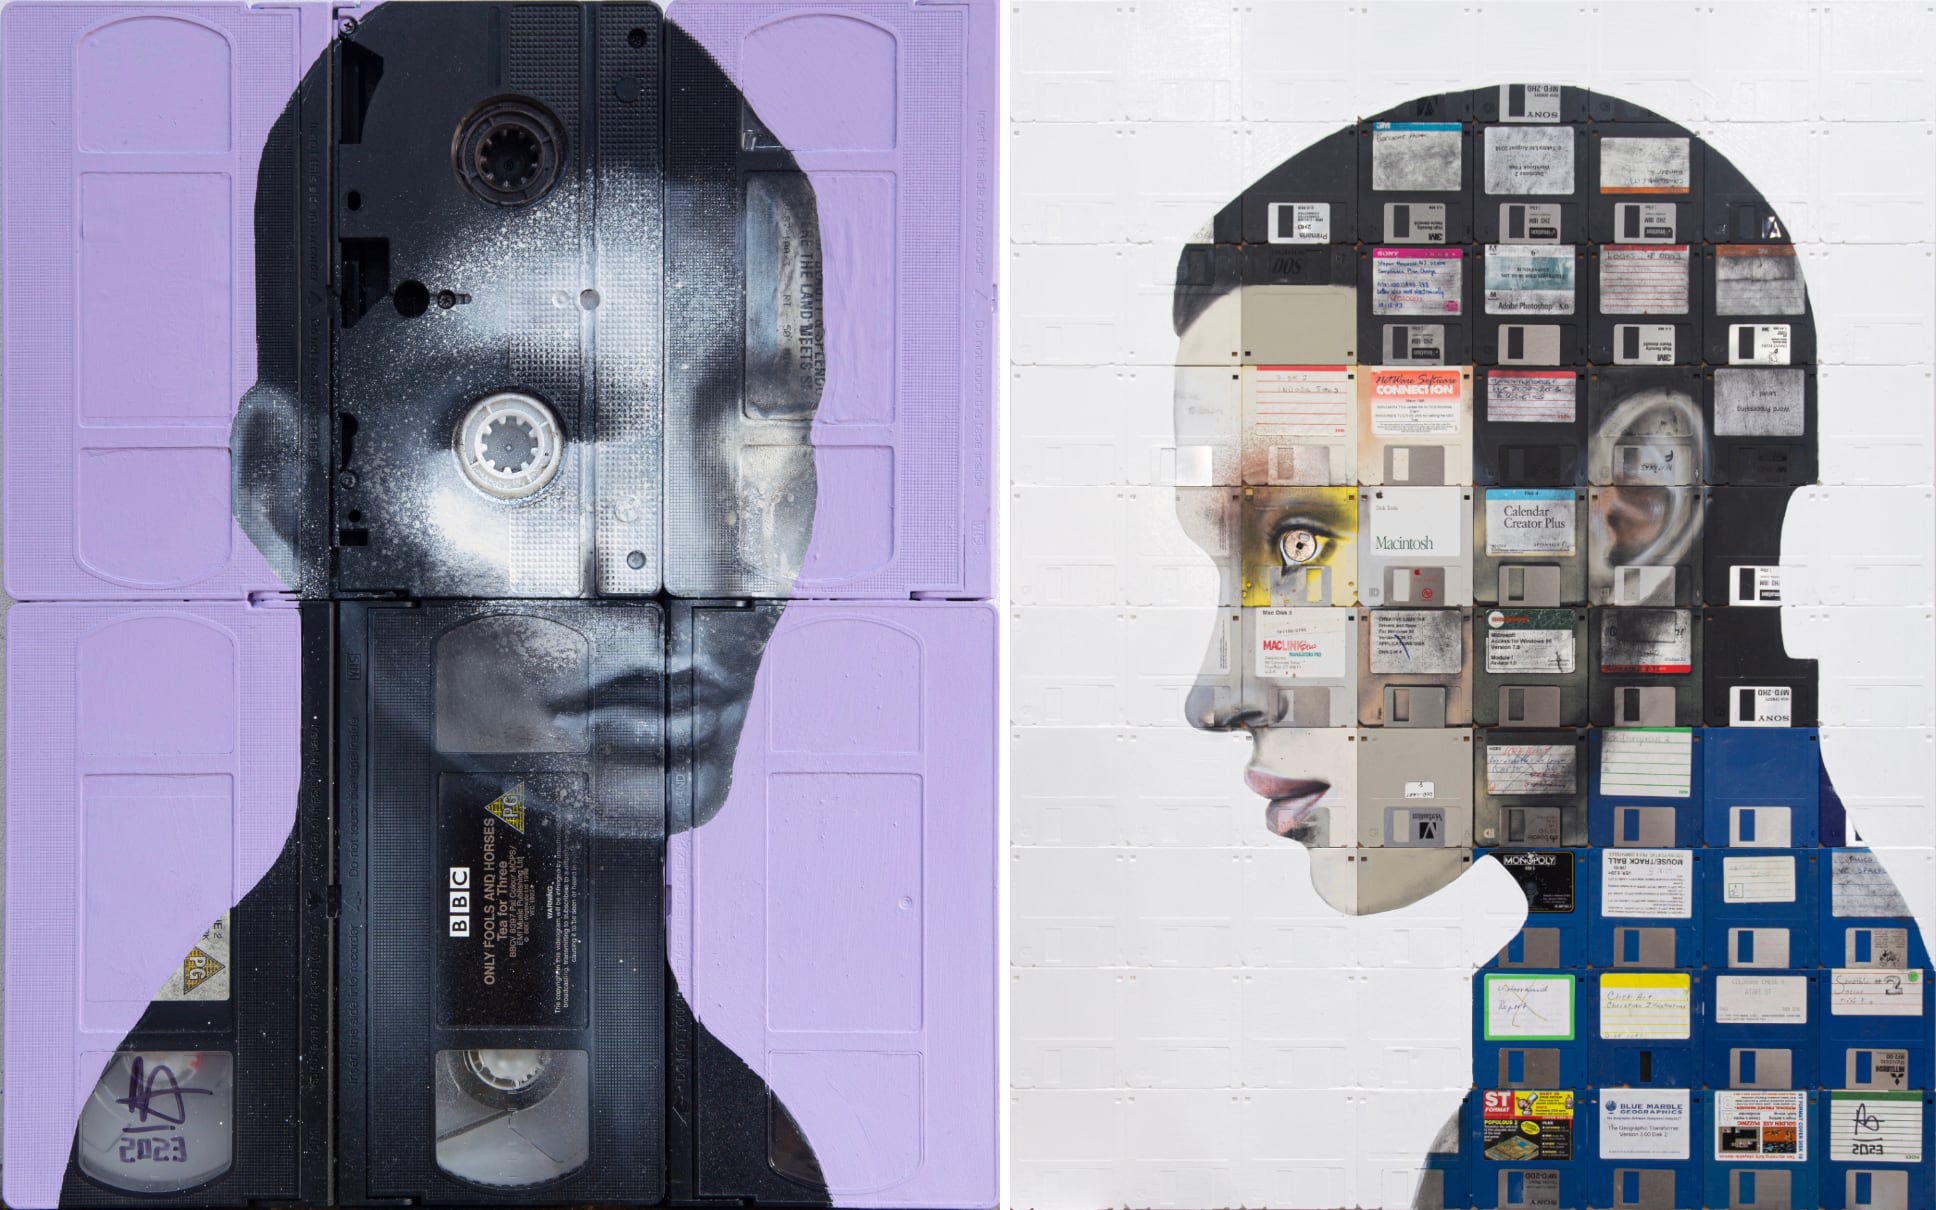 Two portraits, one on purple painted VHS tapes and the other on floppy disks. Both depict grayscale figures